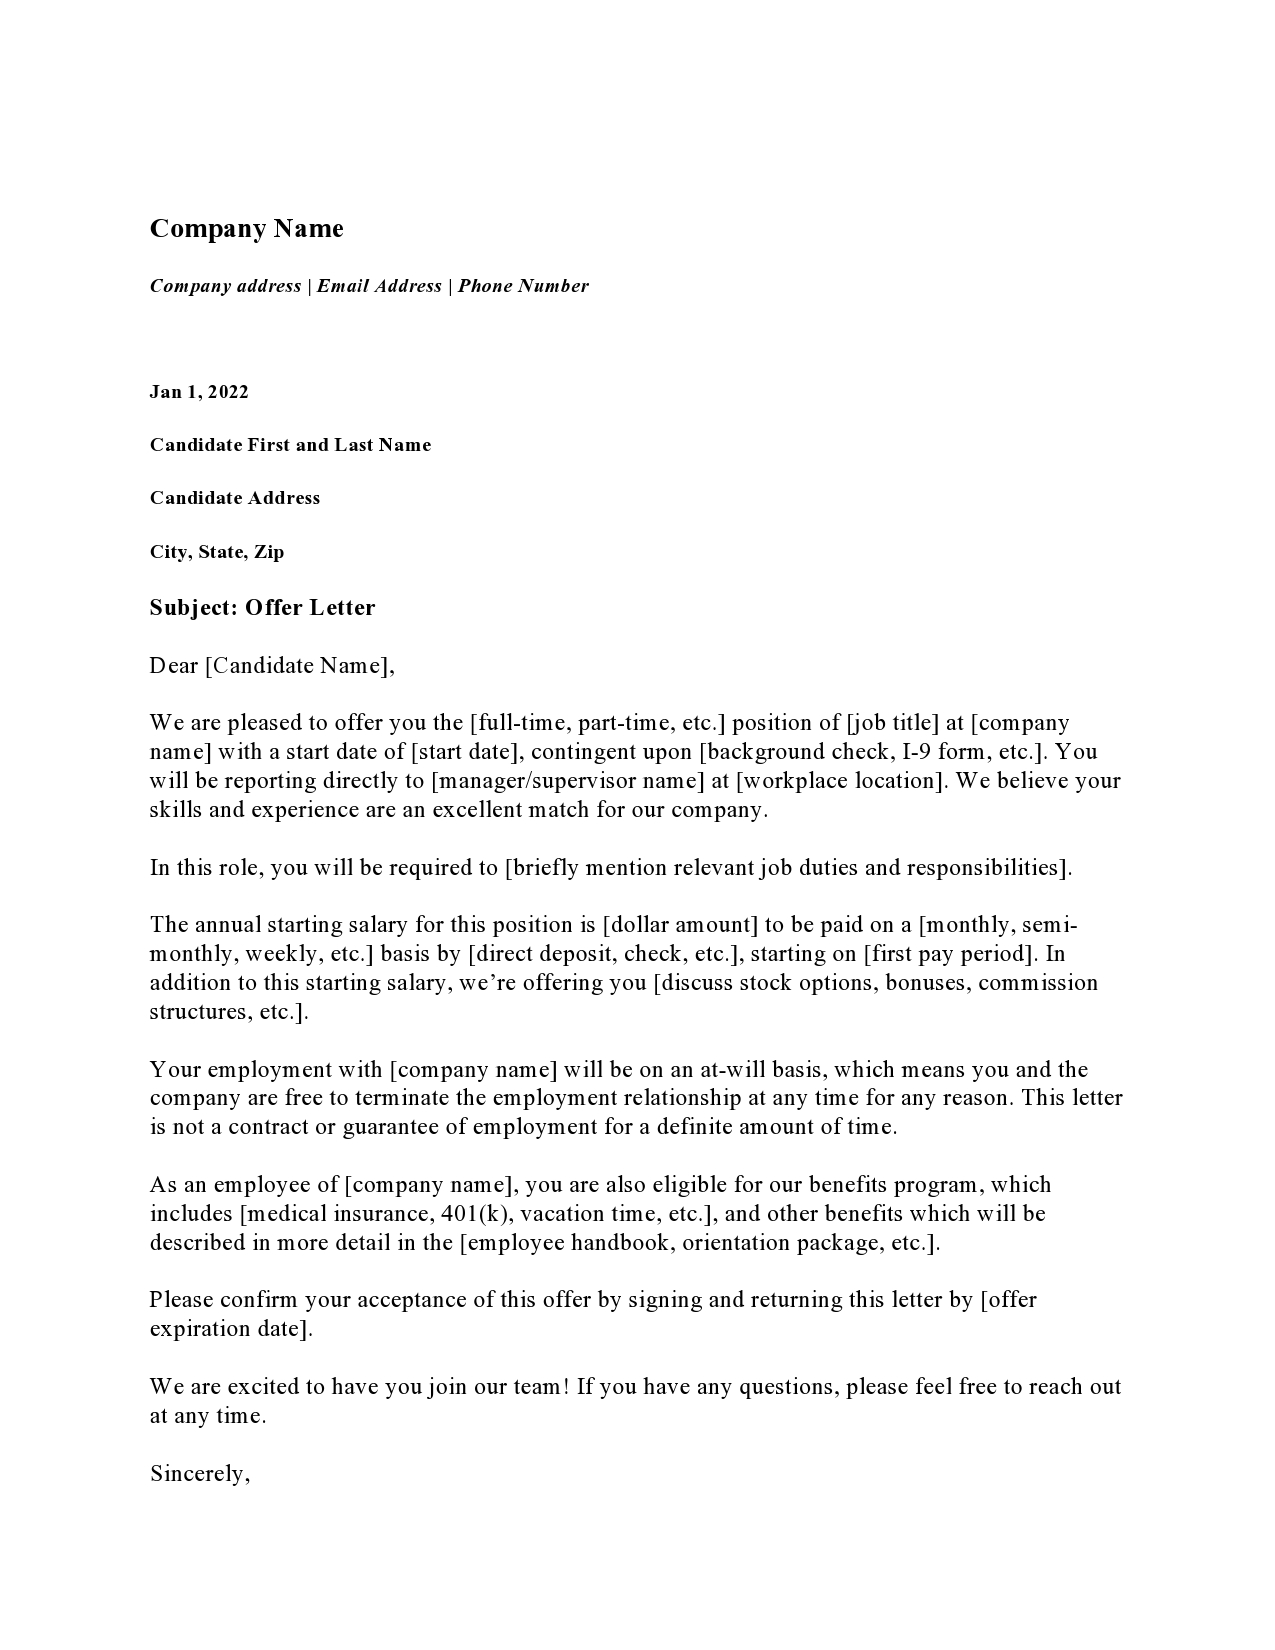 Free employment offer letter template 23